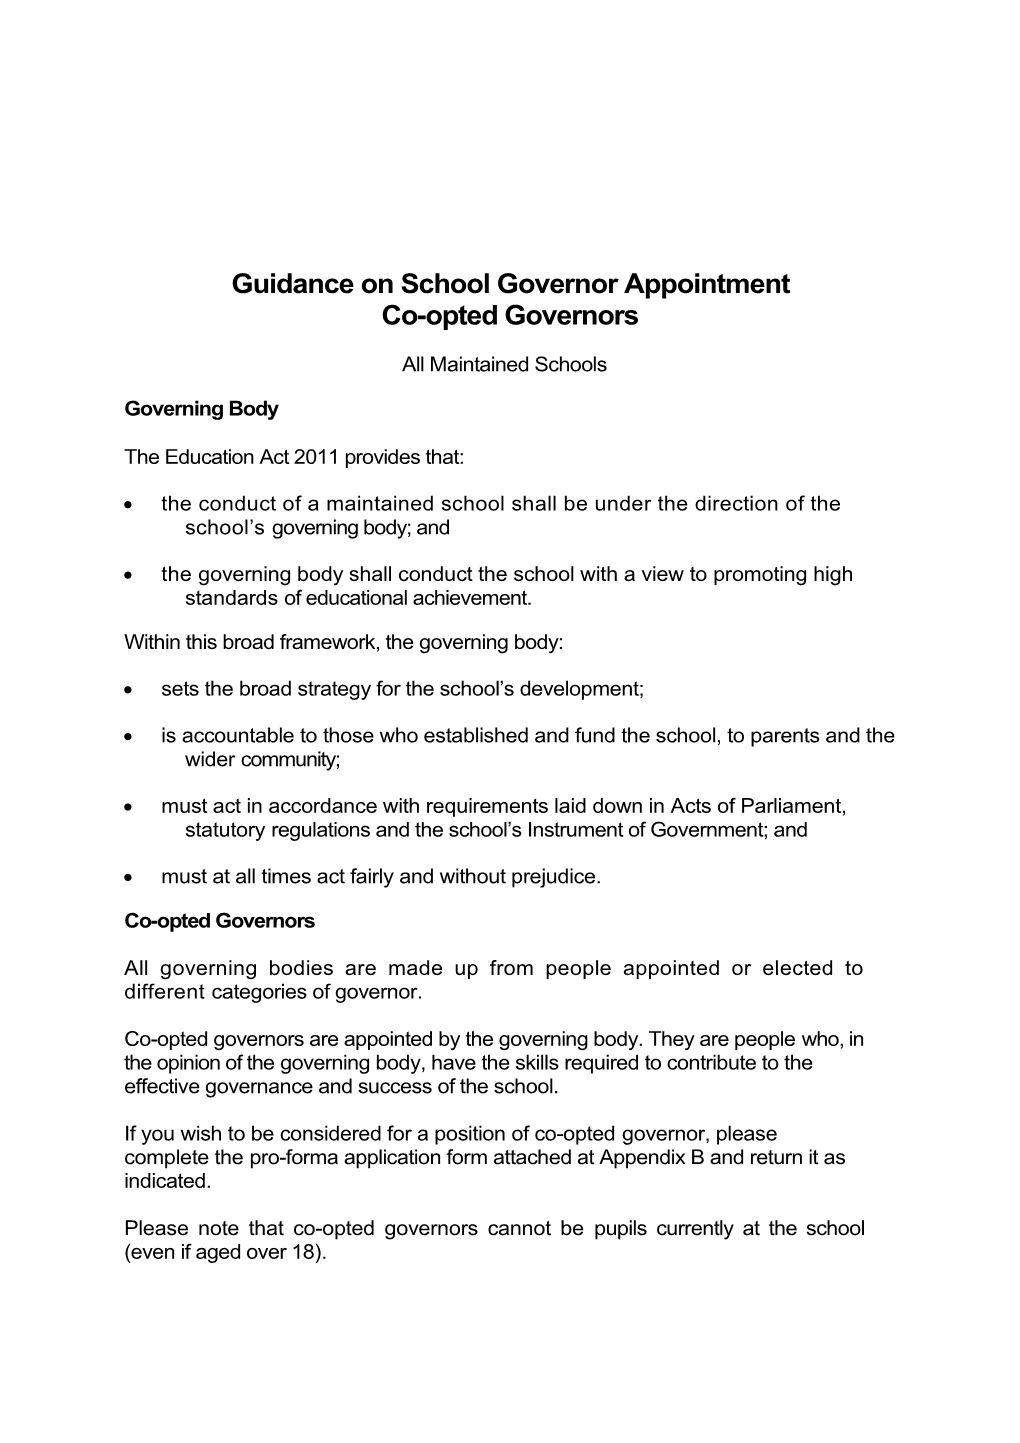 Guidance on School Governor Appointment Co-Opted Governors